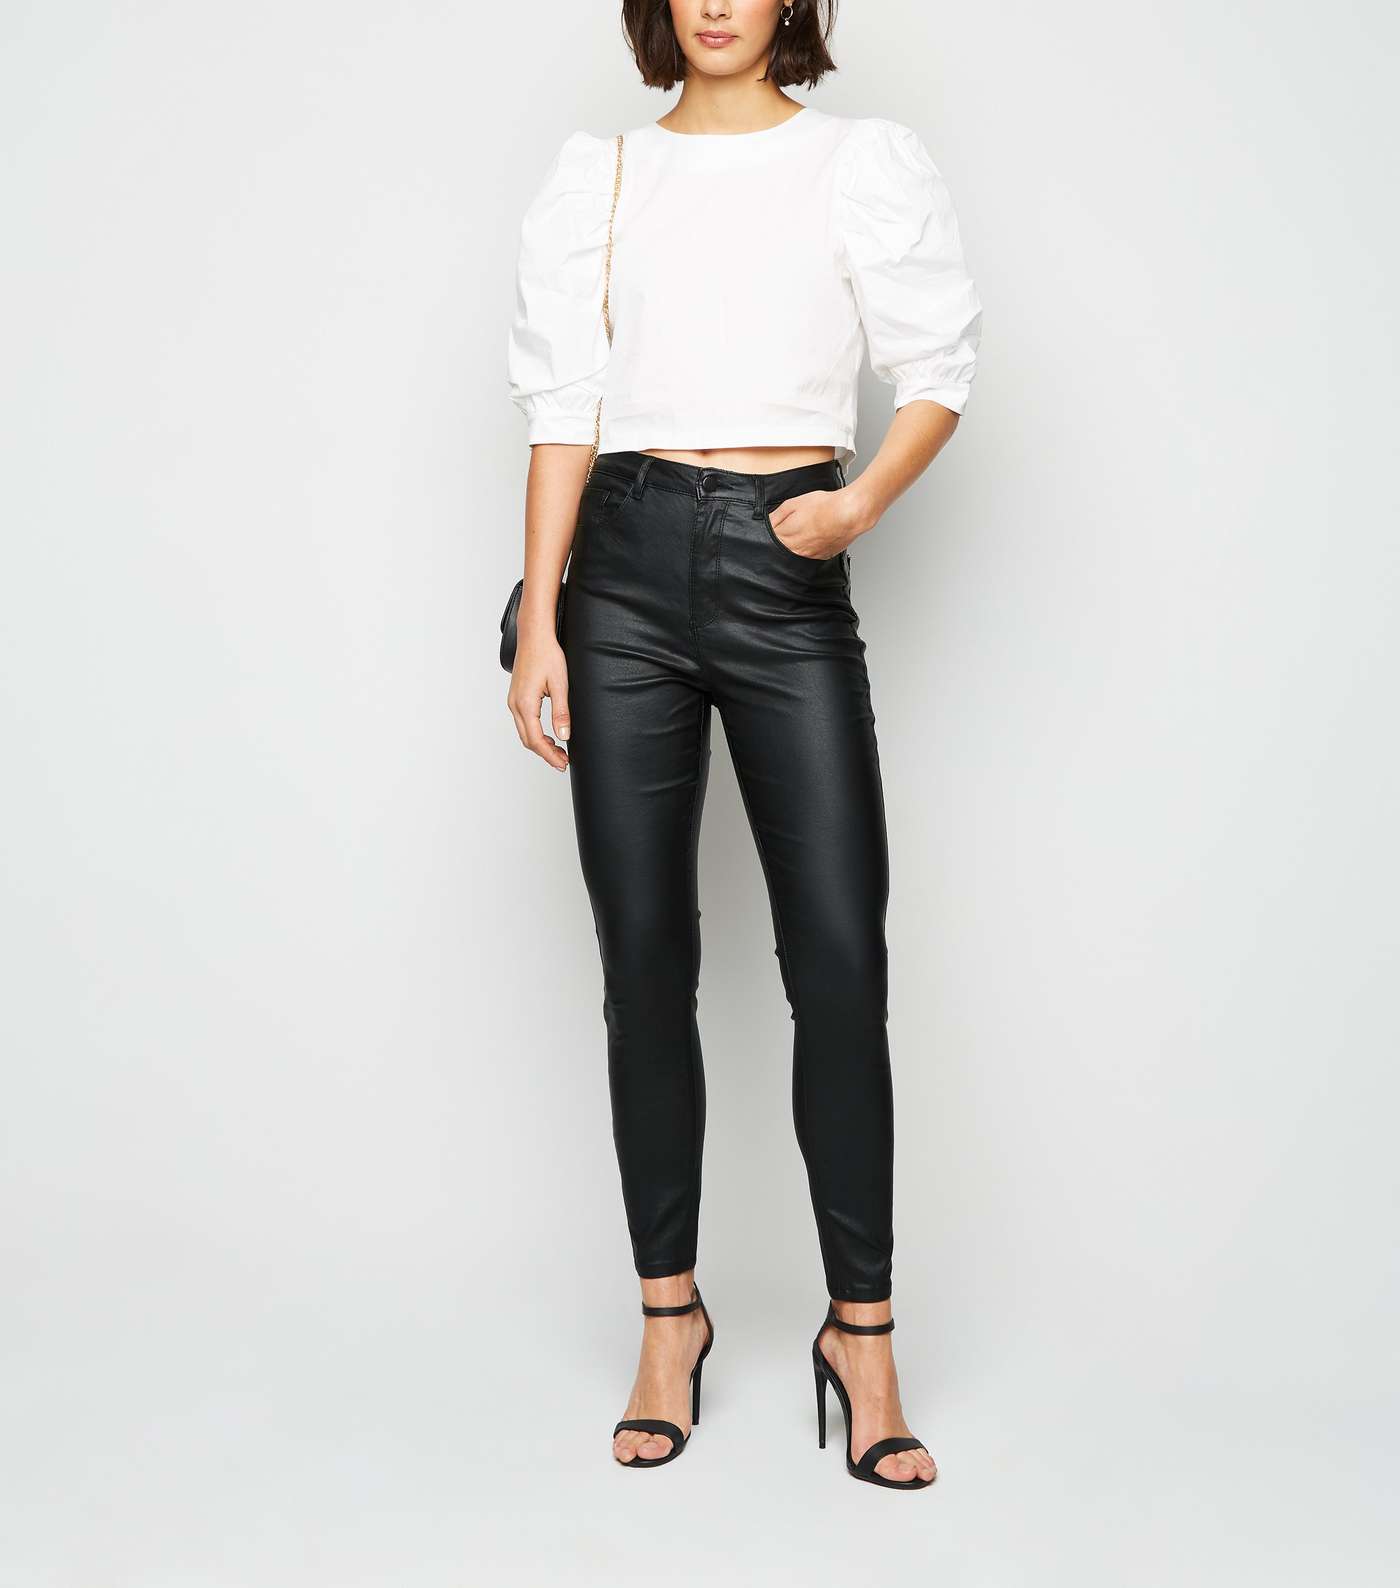 Urban Bliss Black Leather-Look Skinny Jeans 